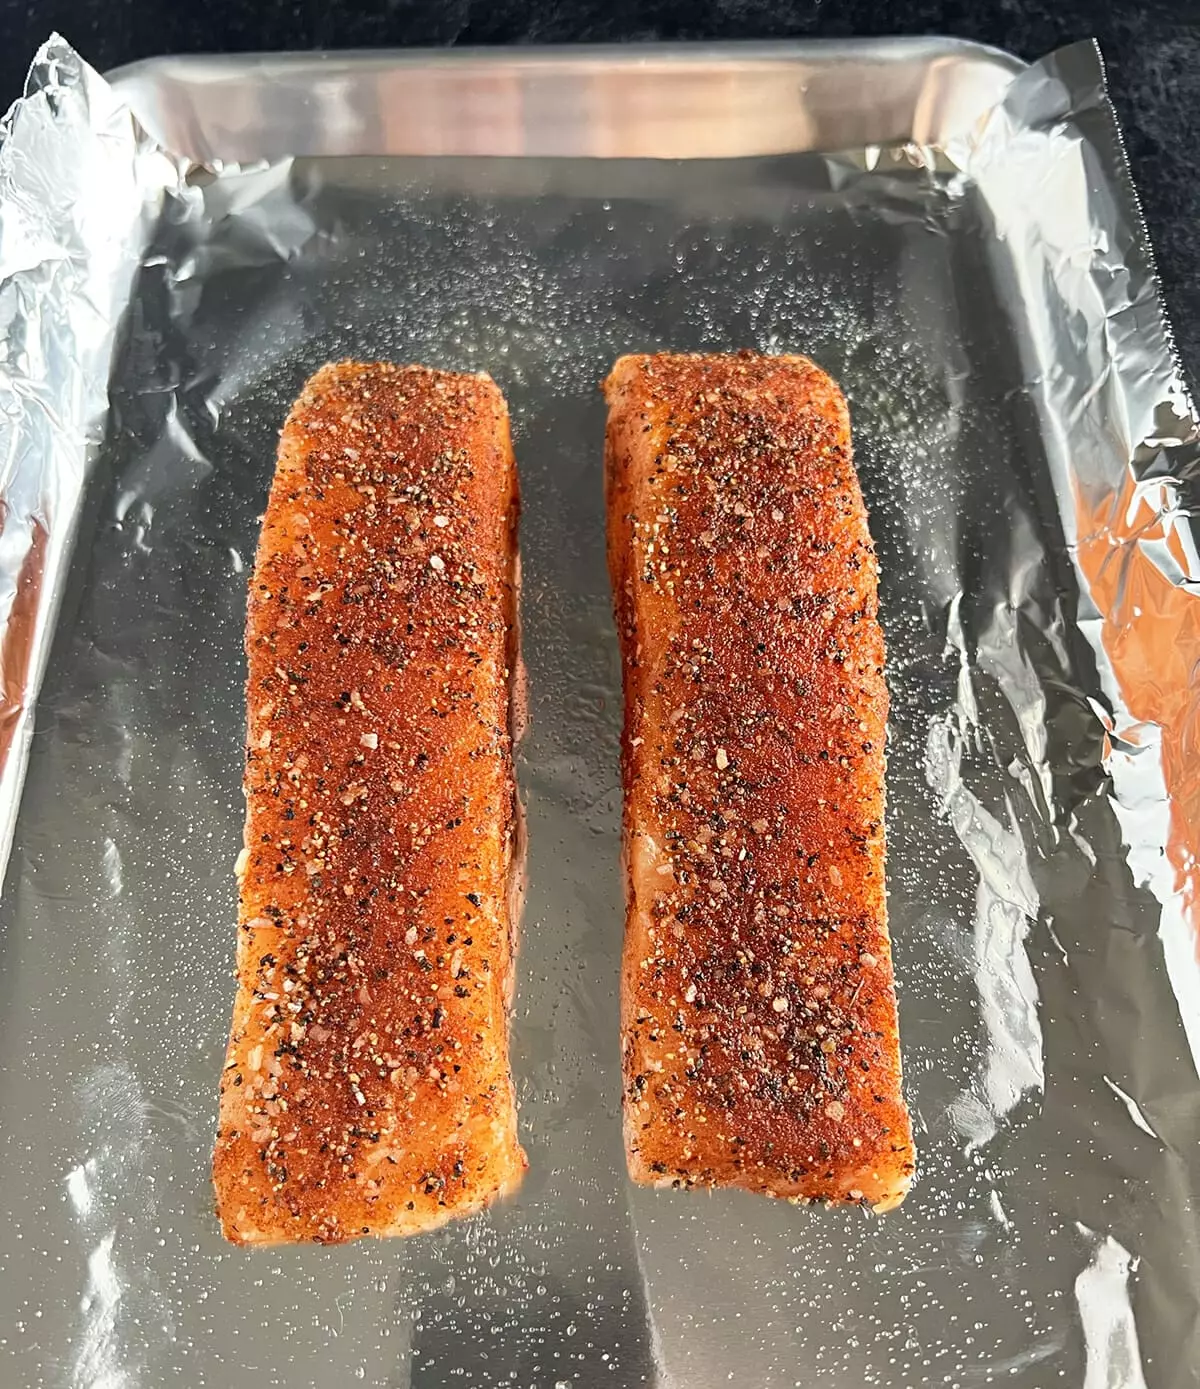 Tender, flakey salmon filets baked in the oven.